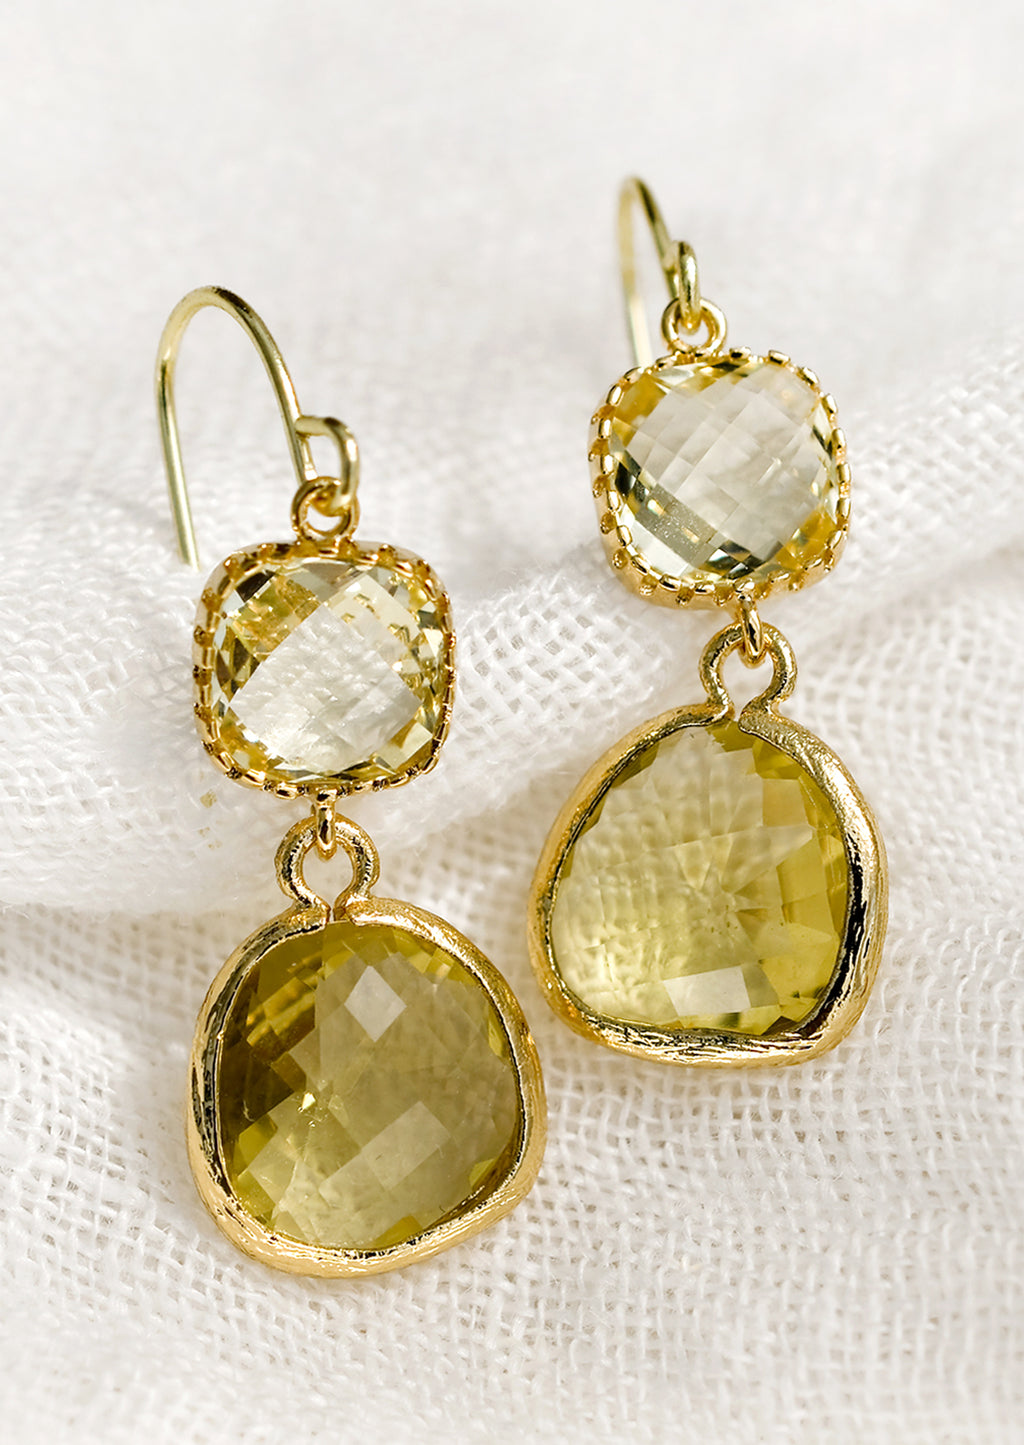 Champagne / Citrine: A pair of two-stone bezeled gem earrings in champagne and citrine.